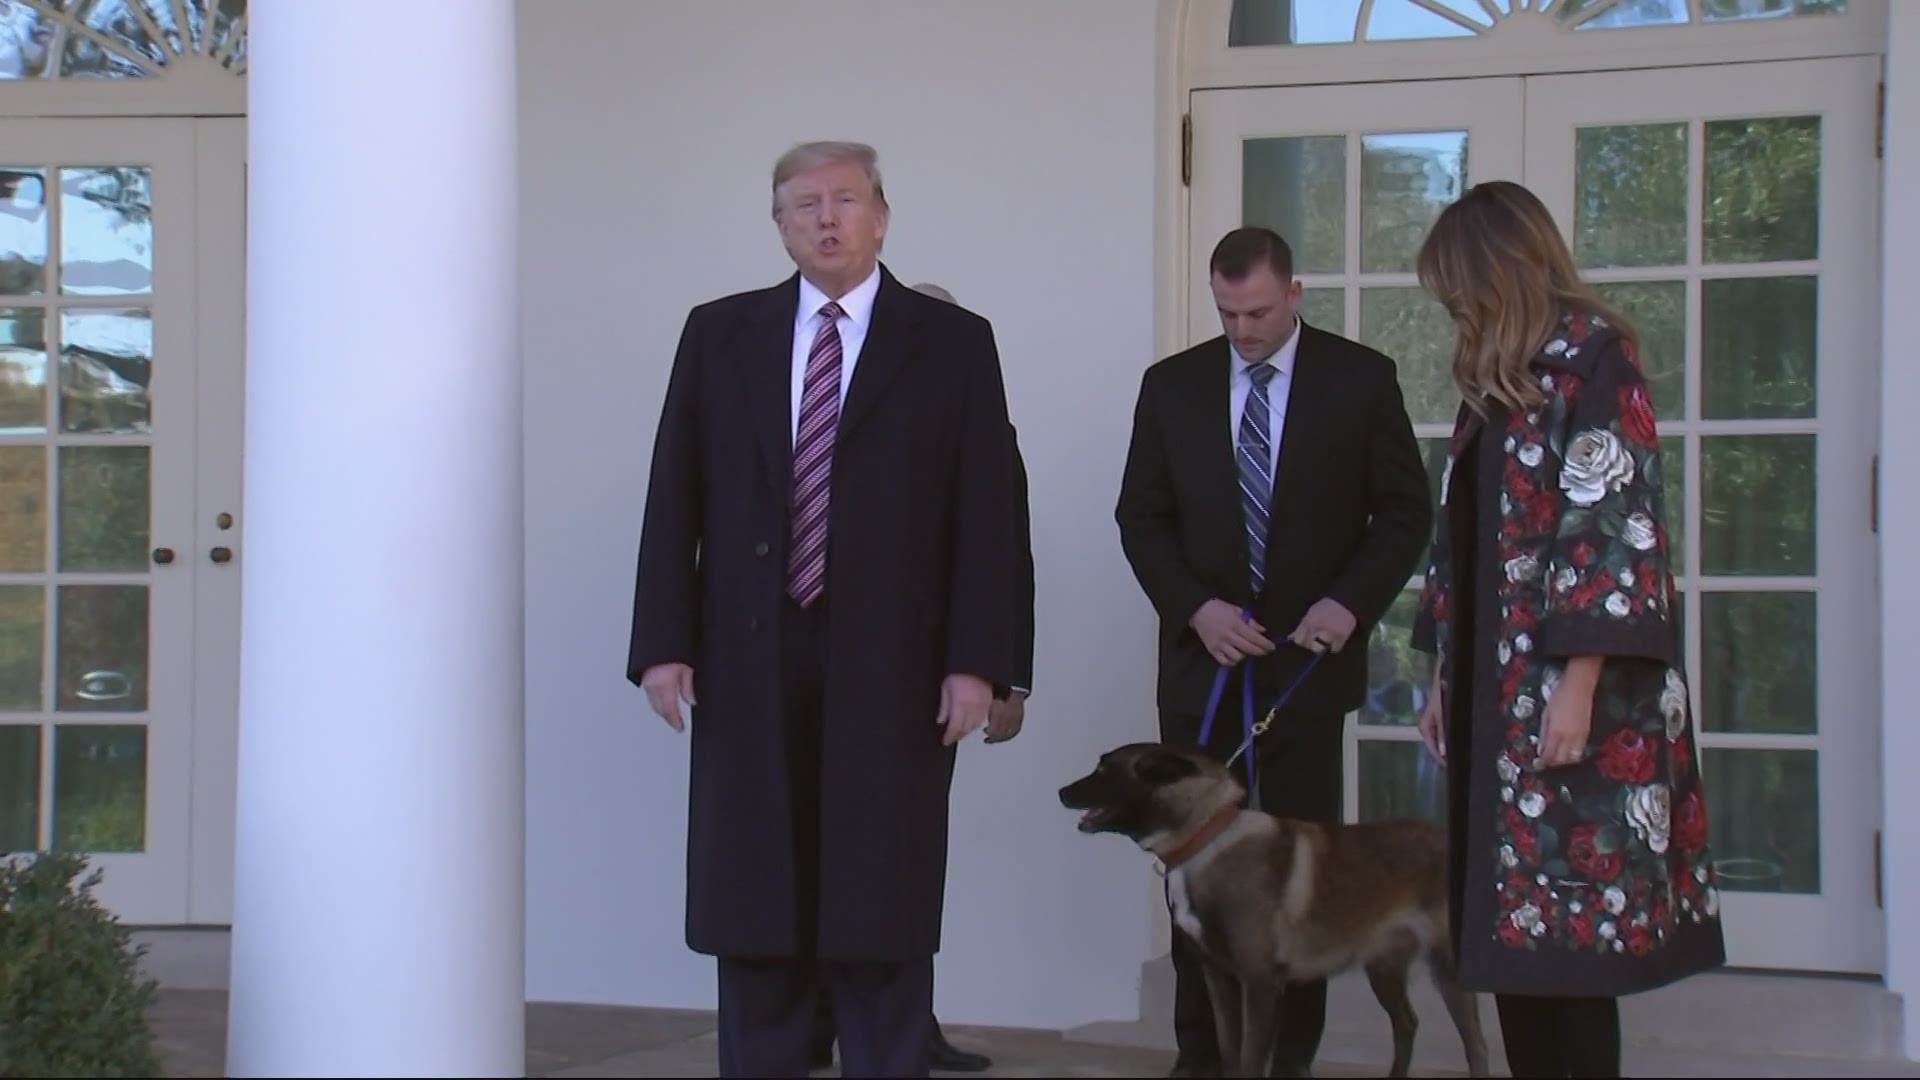 The military dog that participated in the operation that ended with the death of Islamic State leader Abu Bakr al-Baghdadi was welcomed to the White House Monday.